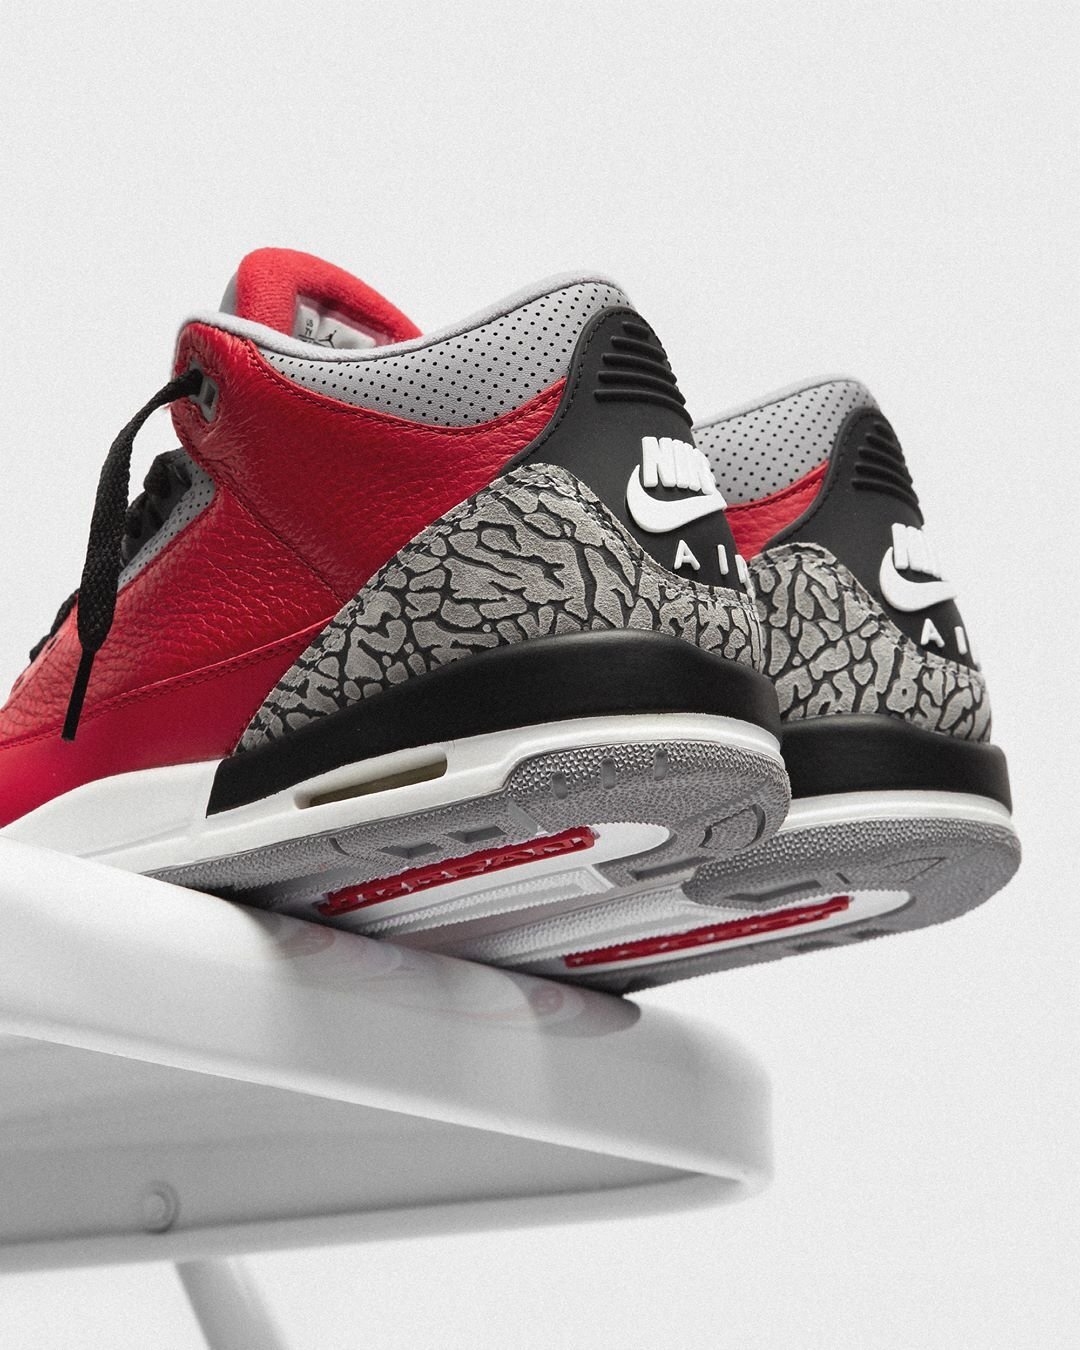 jordan 3 red cement for sale